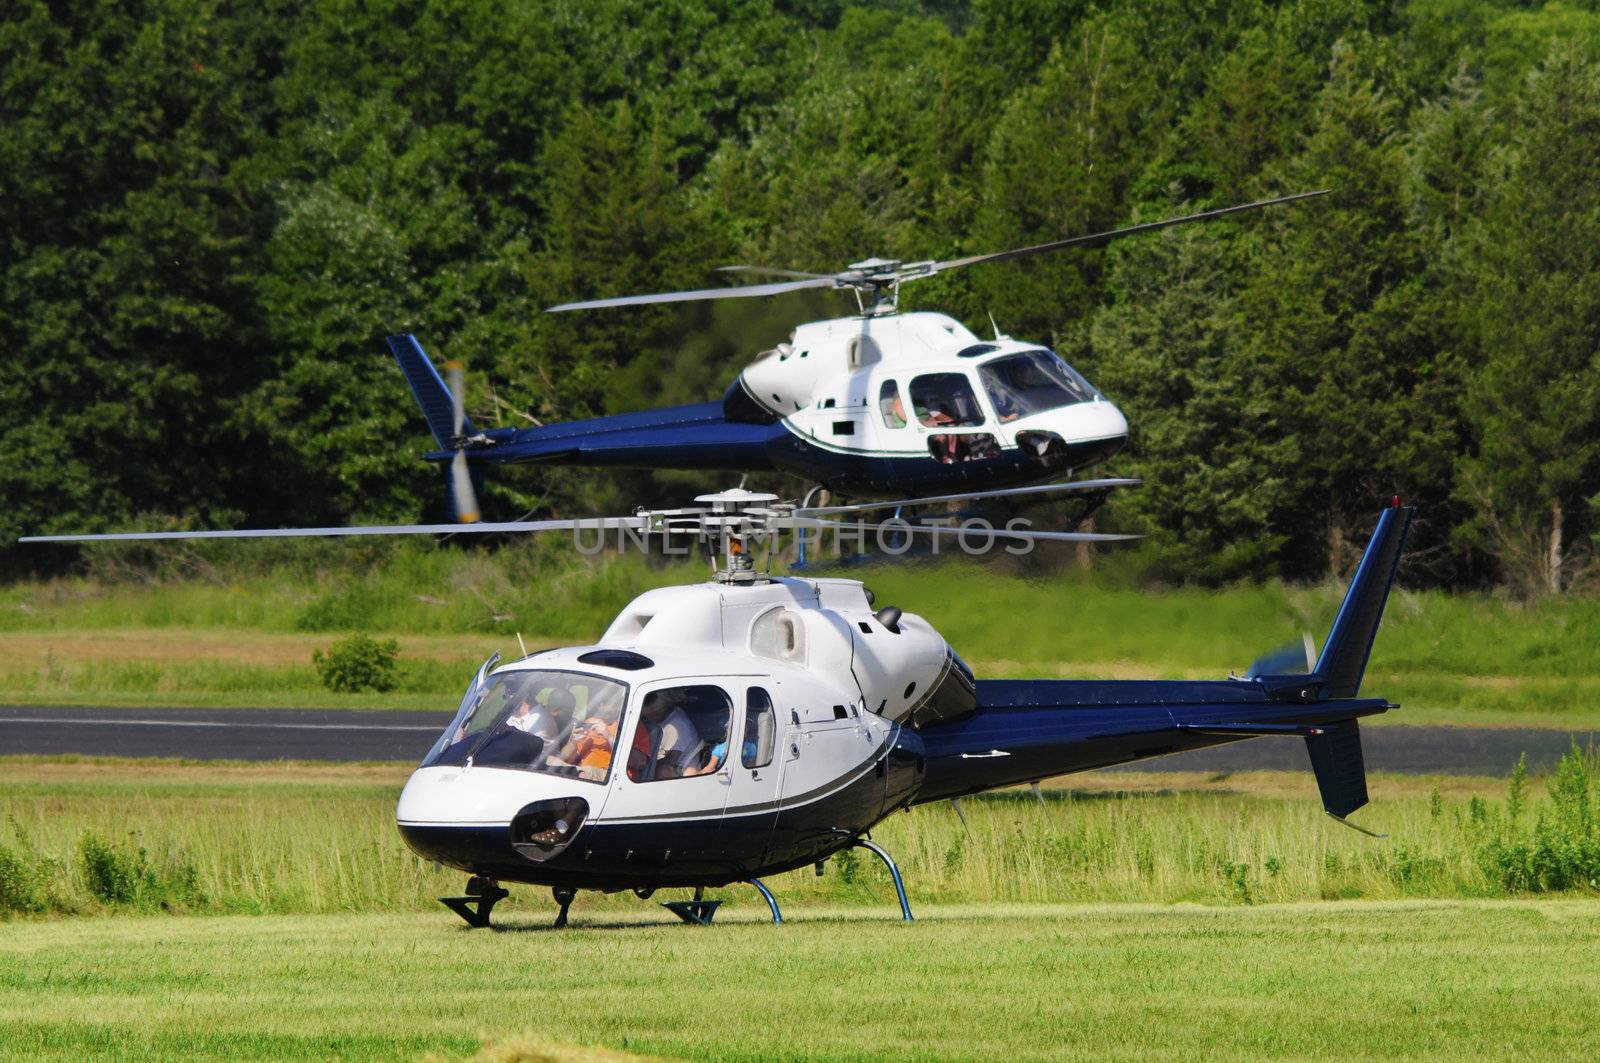 Two blue and white helicopters landing in a grass field